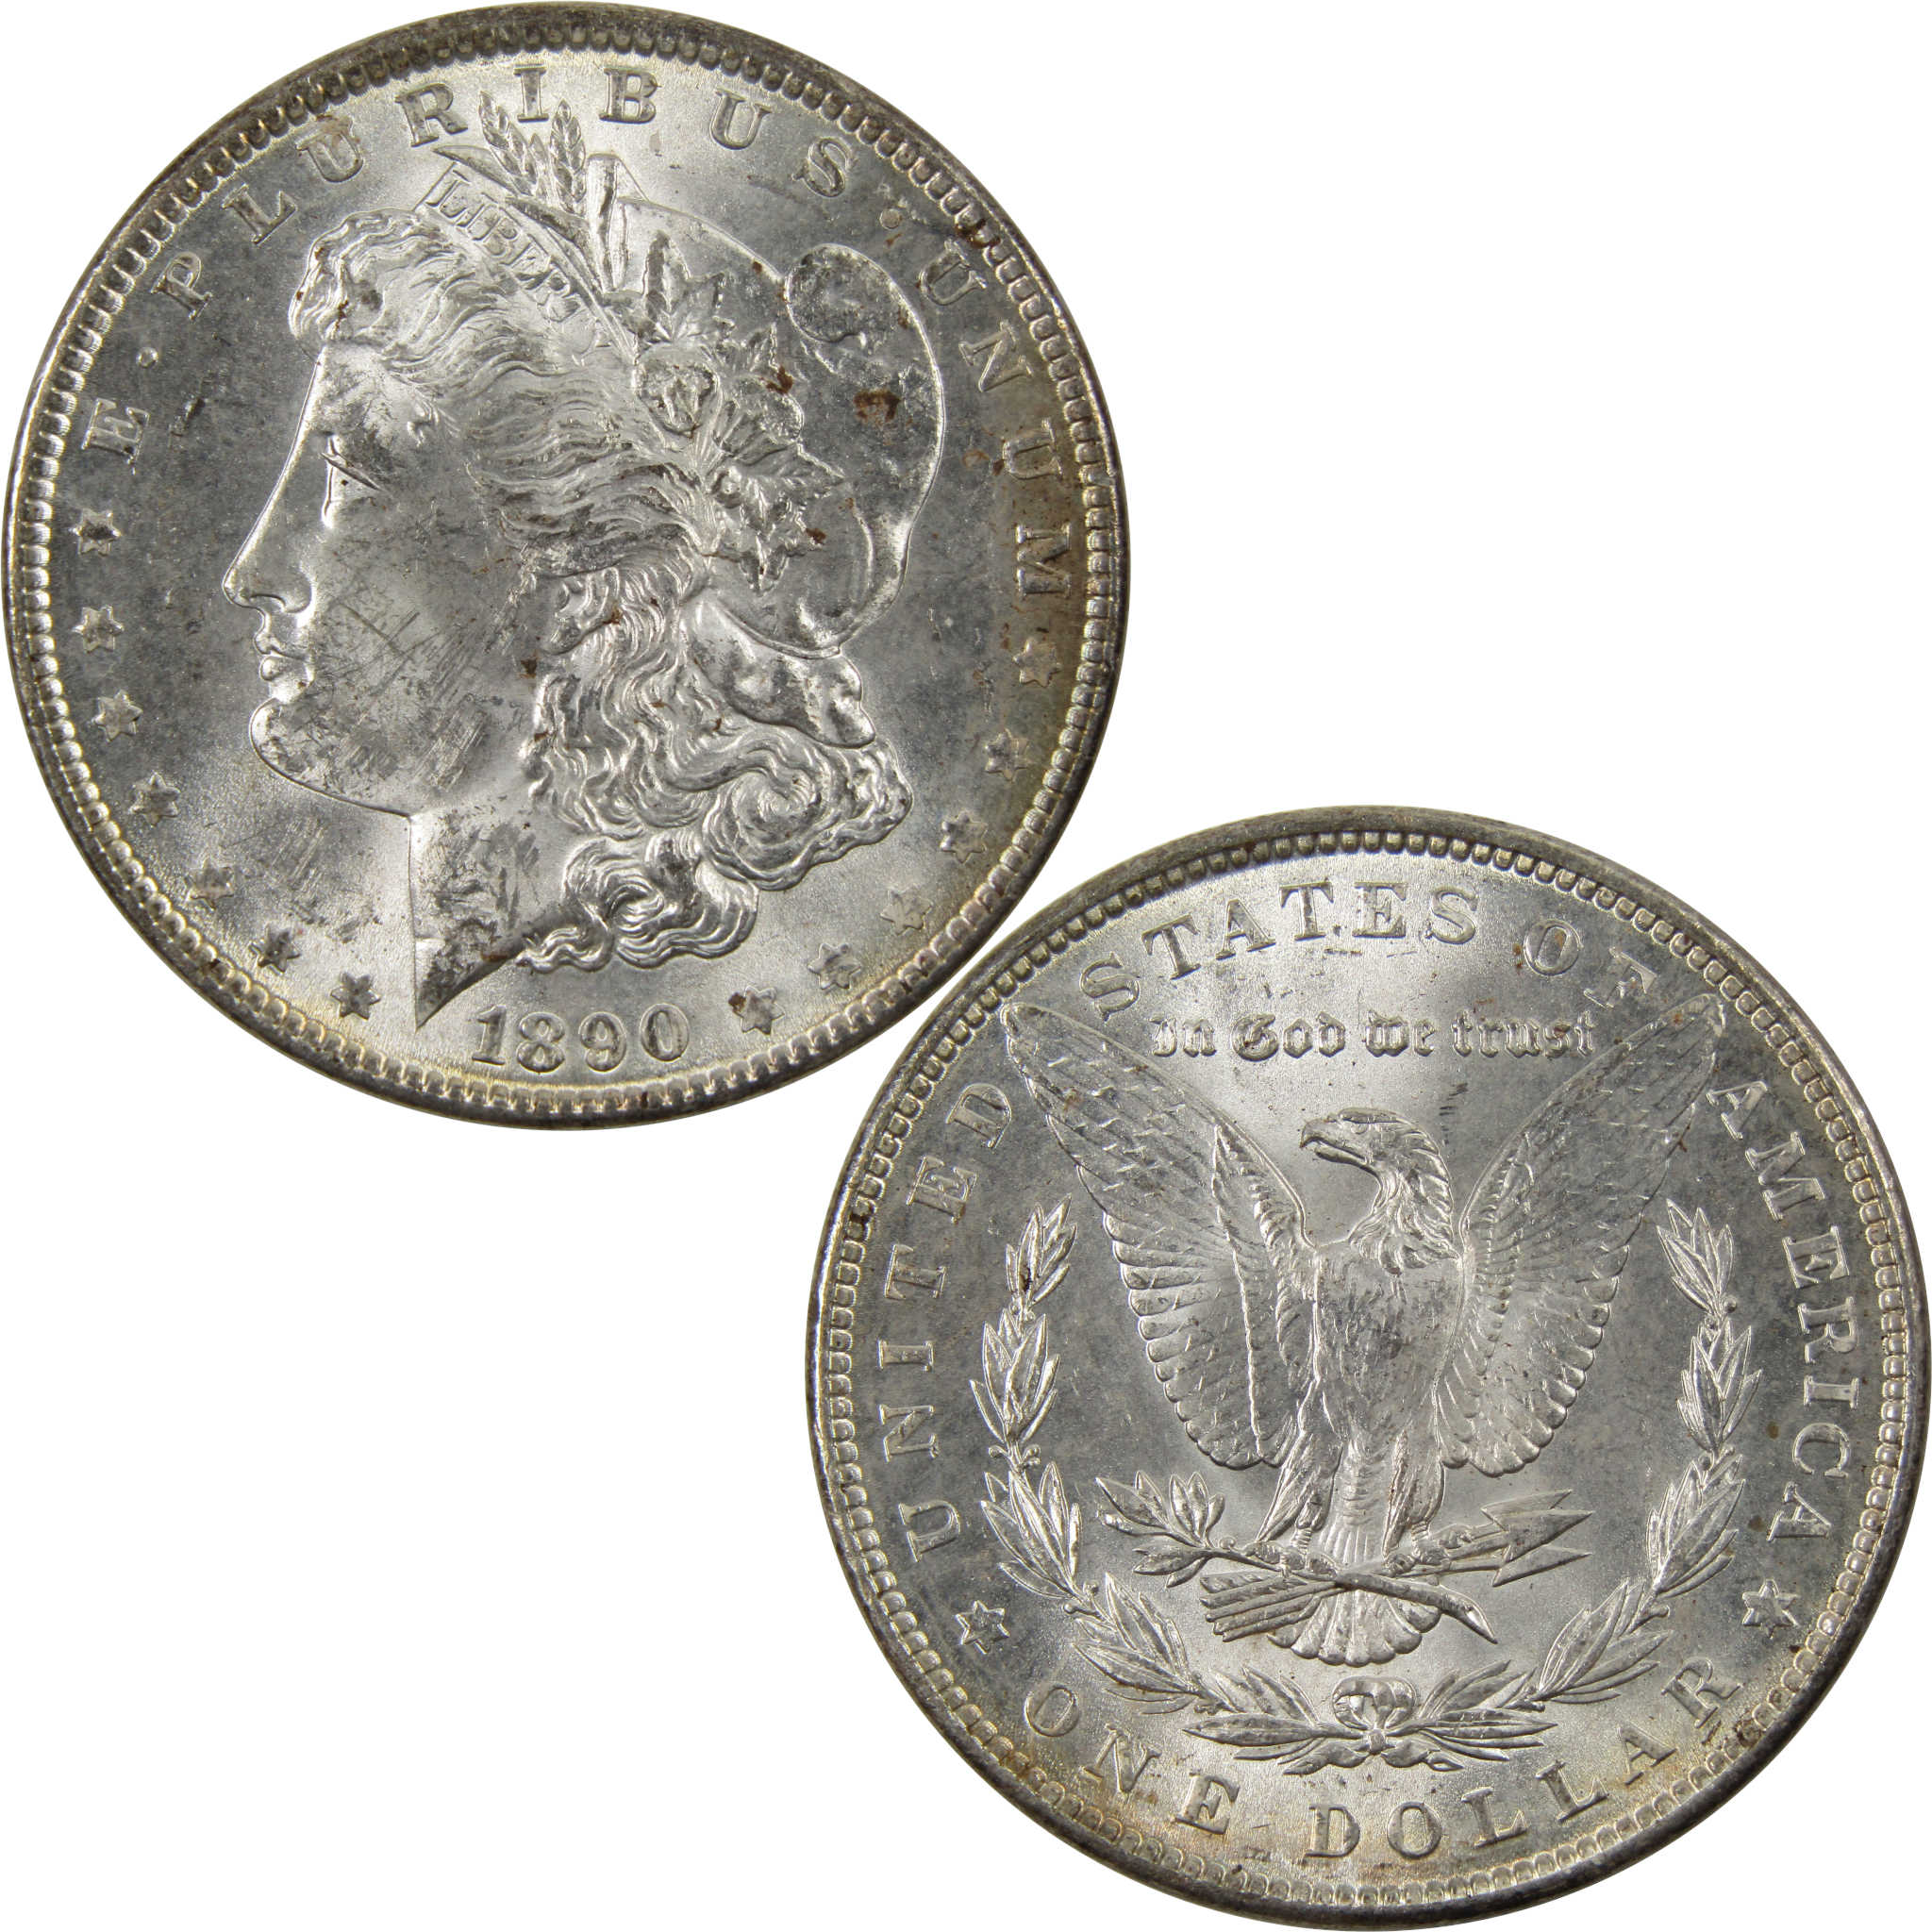 1890 Morgan Dollar Uncirculated Details 90% Silver $1 Coin SKU:I9878 - Morgan coin - Morgan silver dollar - Morgan silver dollar for sale - Profile Coins &amp; Collectibles